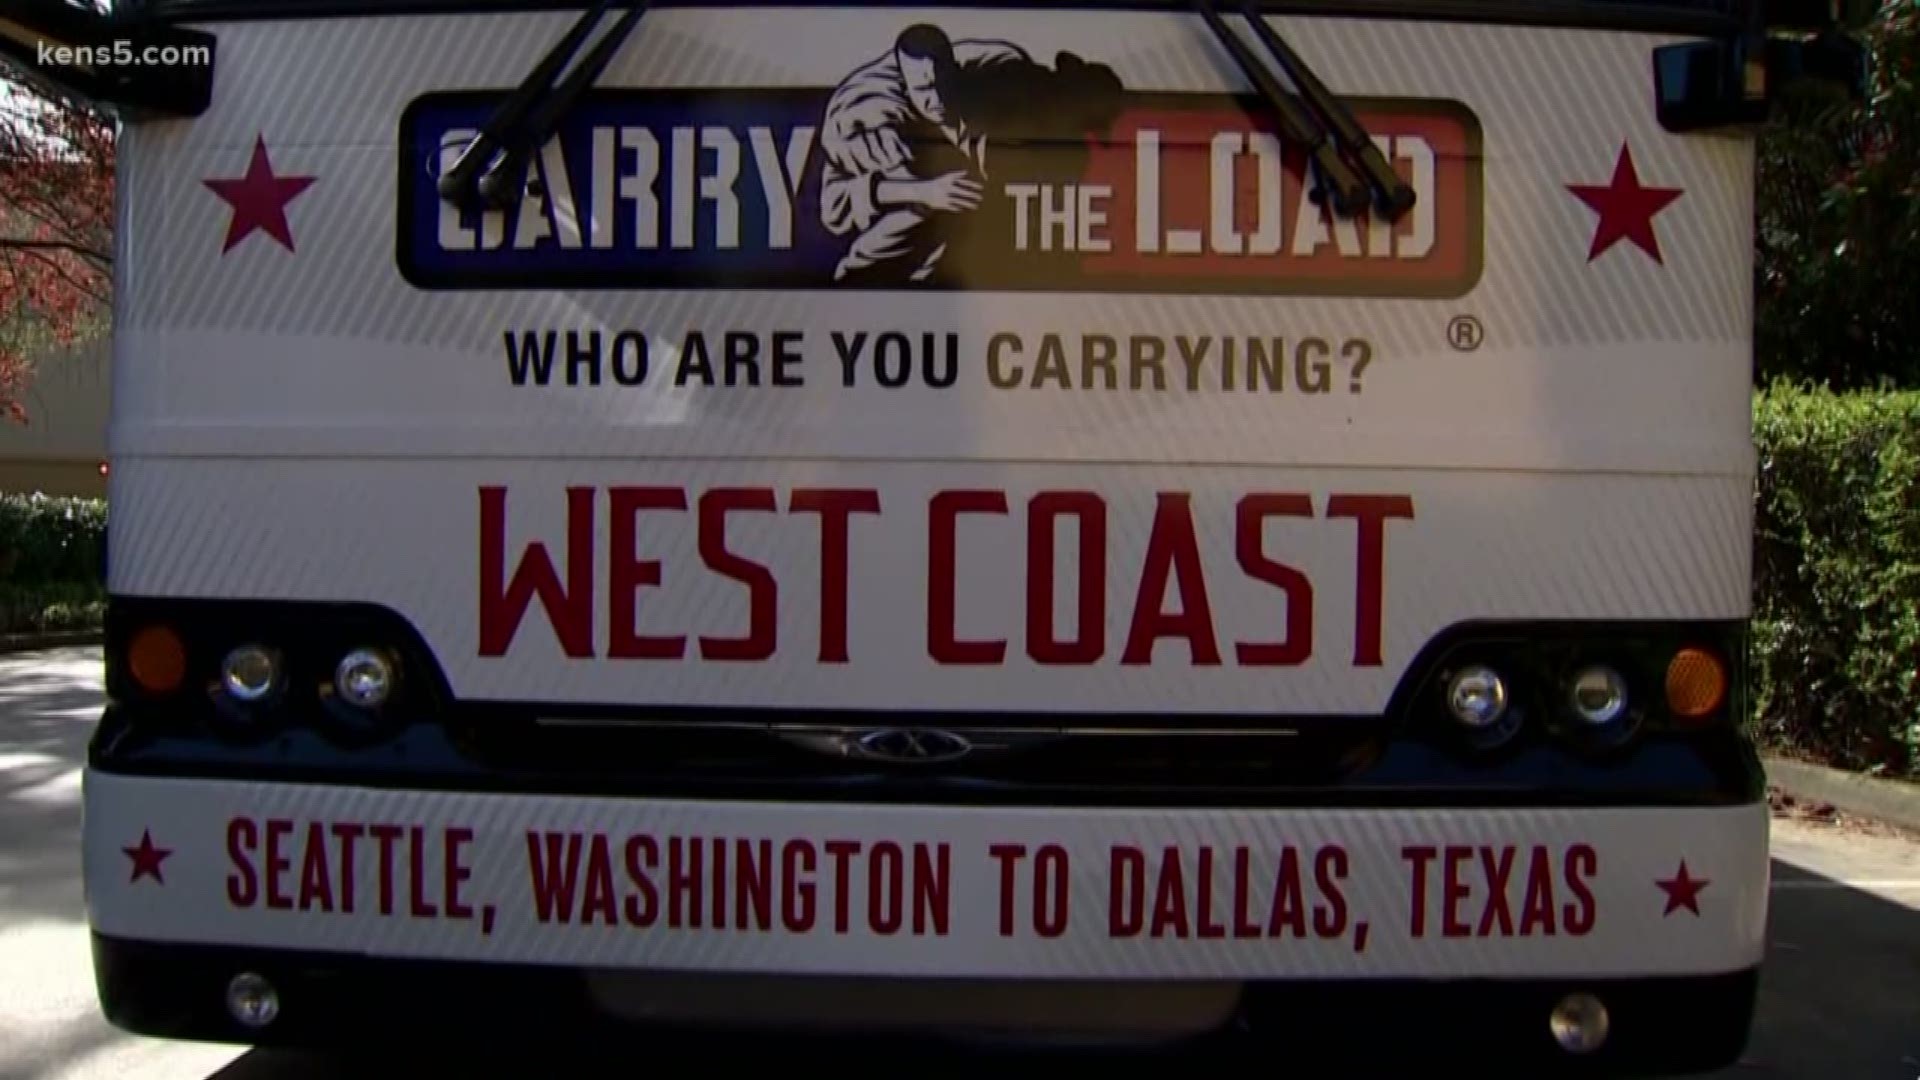 Carry the Load's West Coast relay begins Thursday morning, with a march and bike ride starting in Seattle and ending in Dallas on Memorial Day weekend.